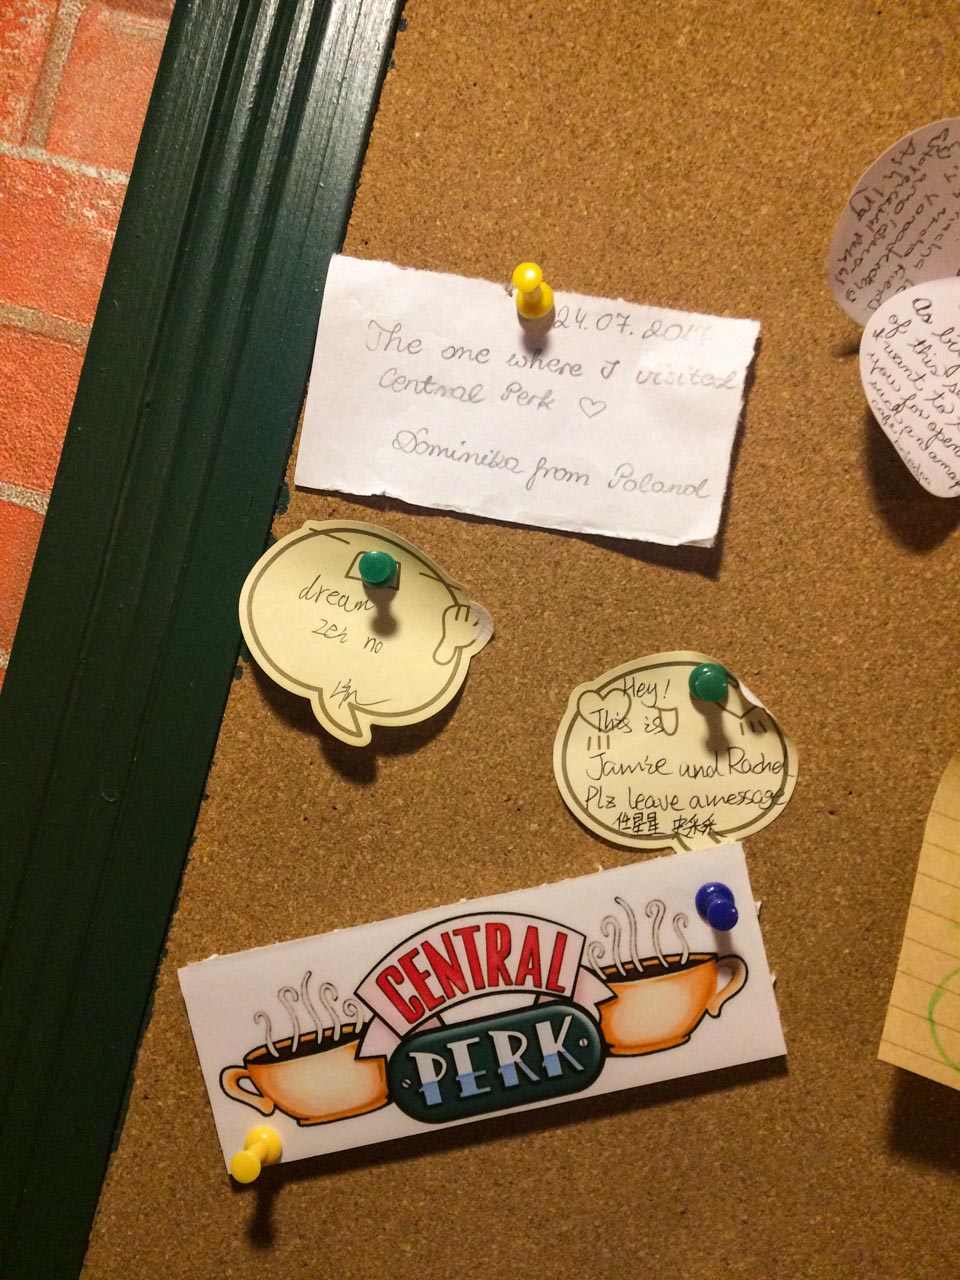 Note saying "The one where I visited Central Perk - Dominika from Poland" pinned to a corkboard